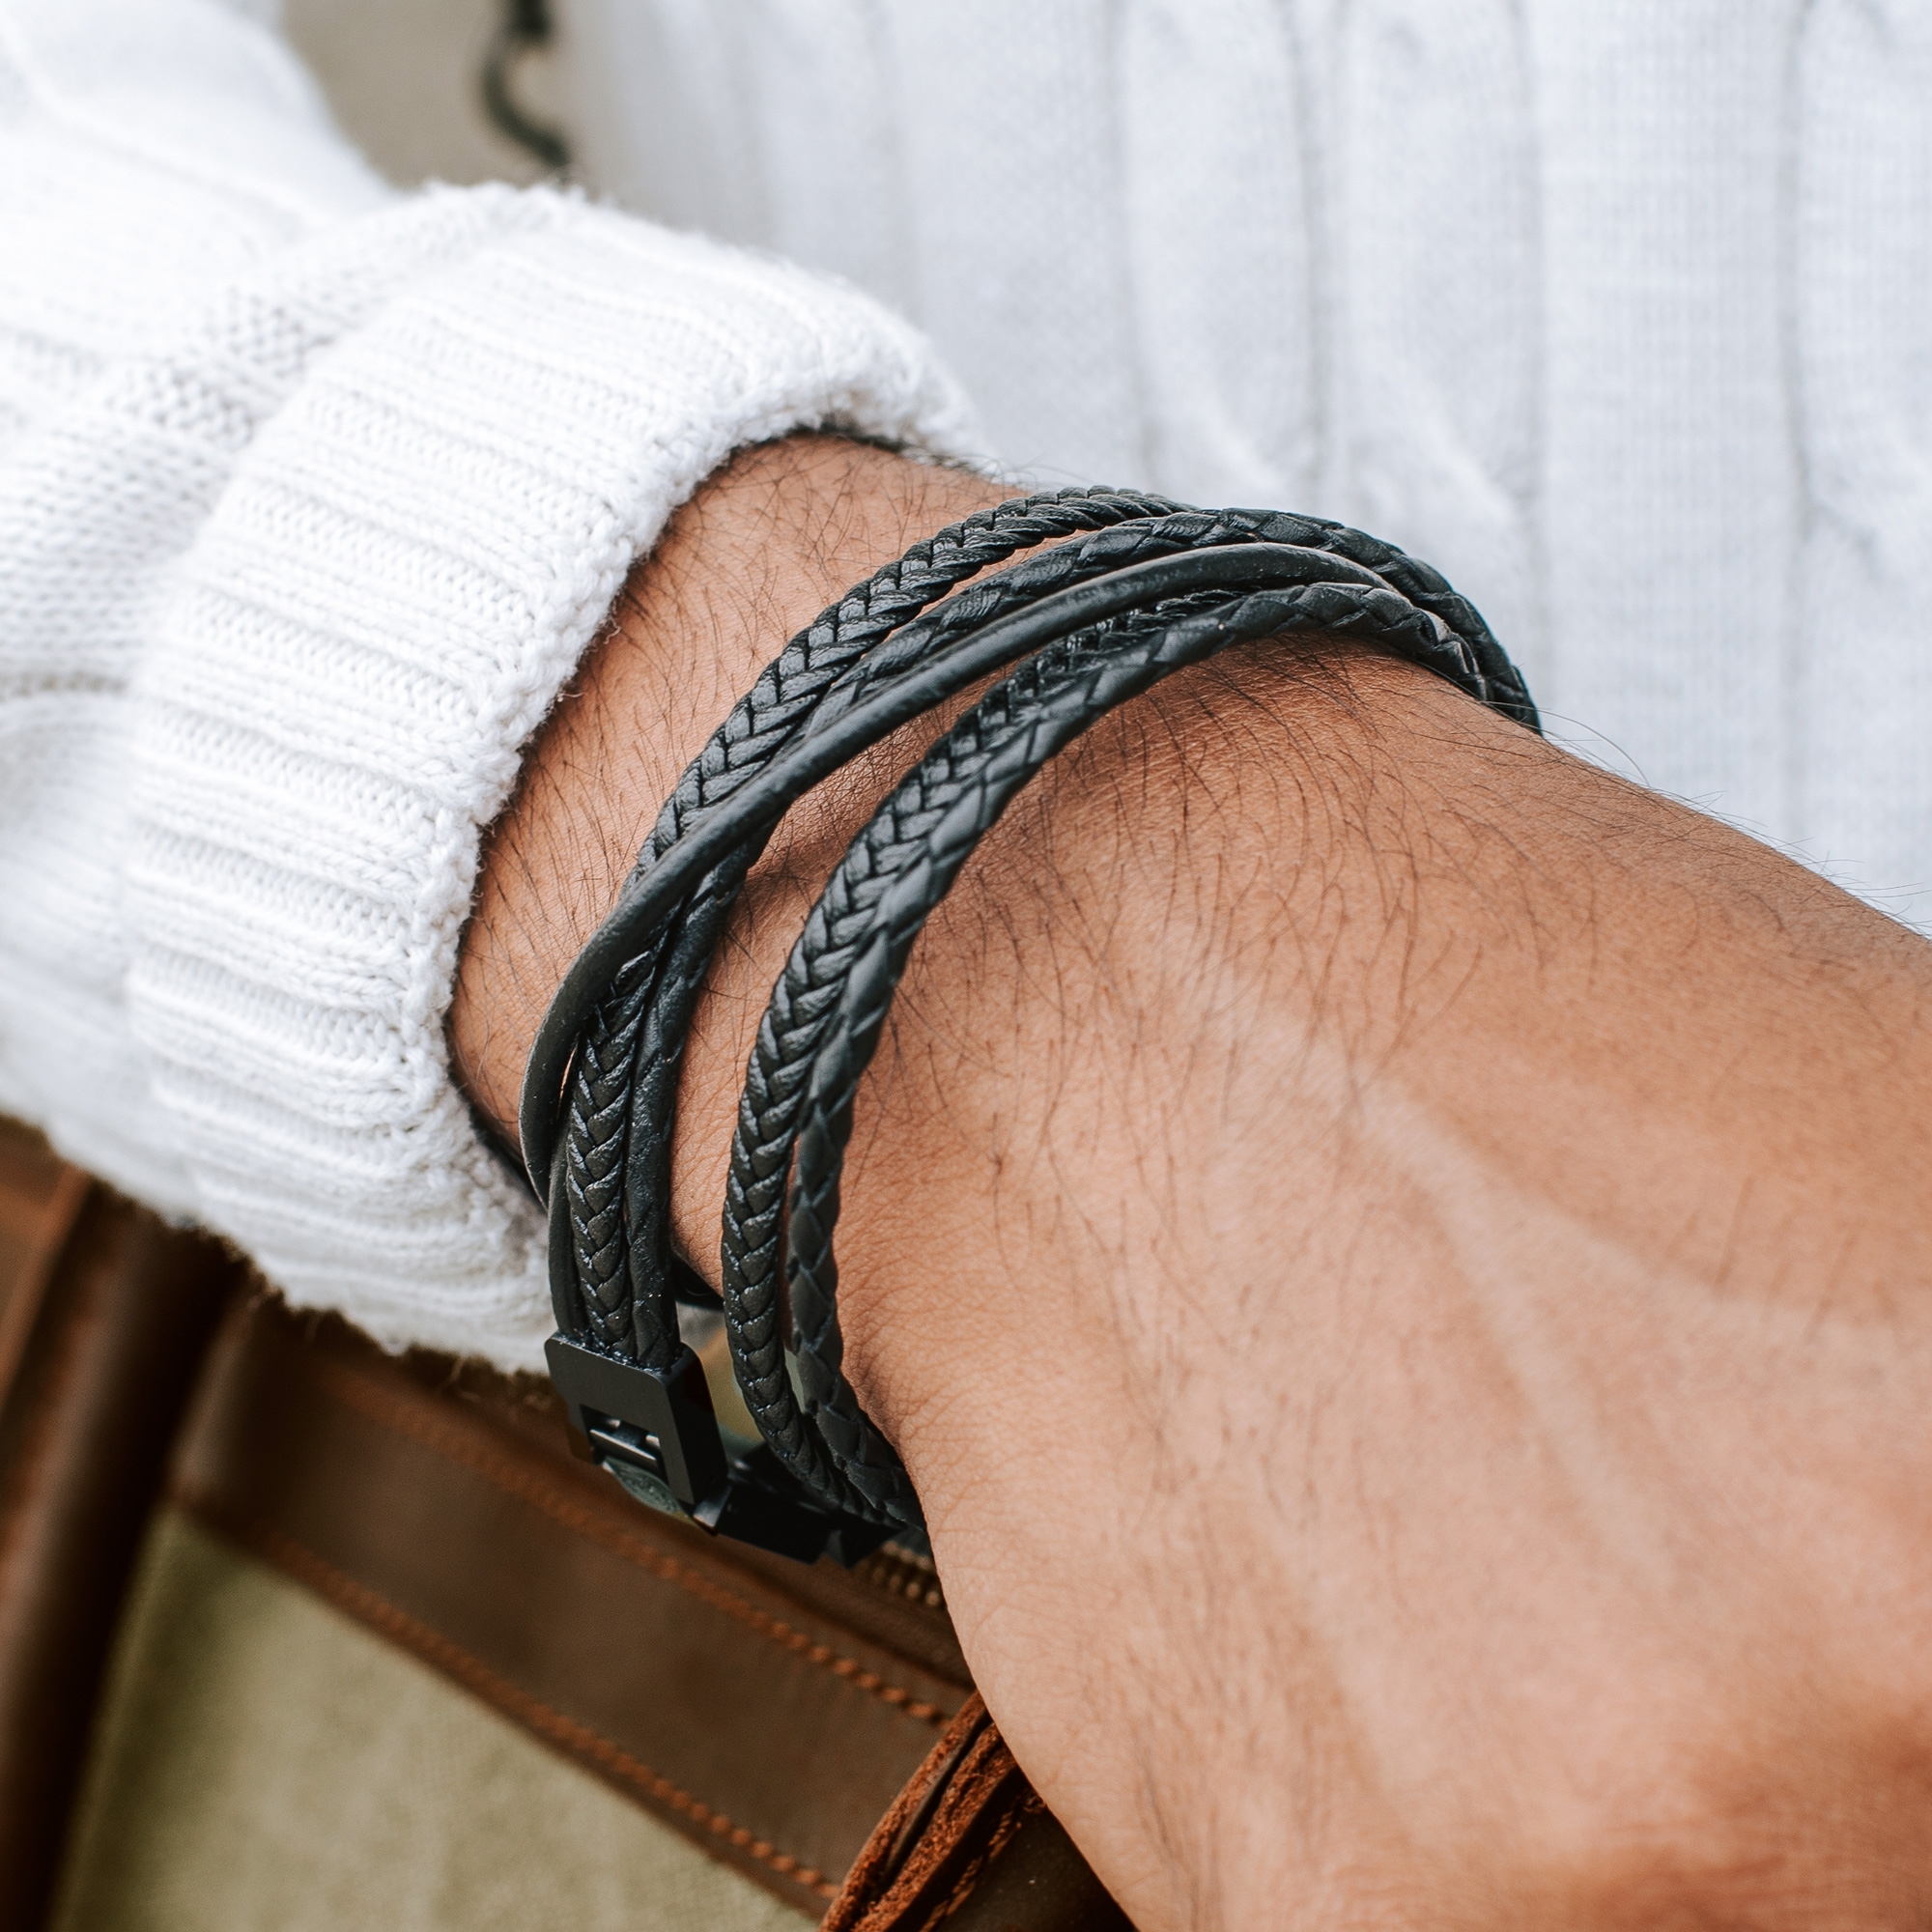 Roy | All Black Leather & Stainless Steel Wrap Bracelet